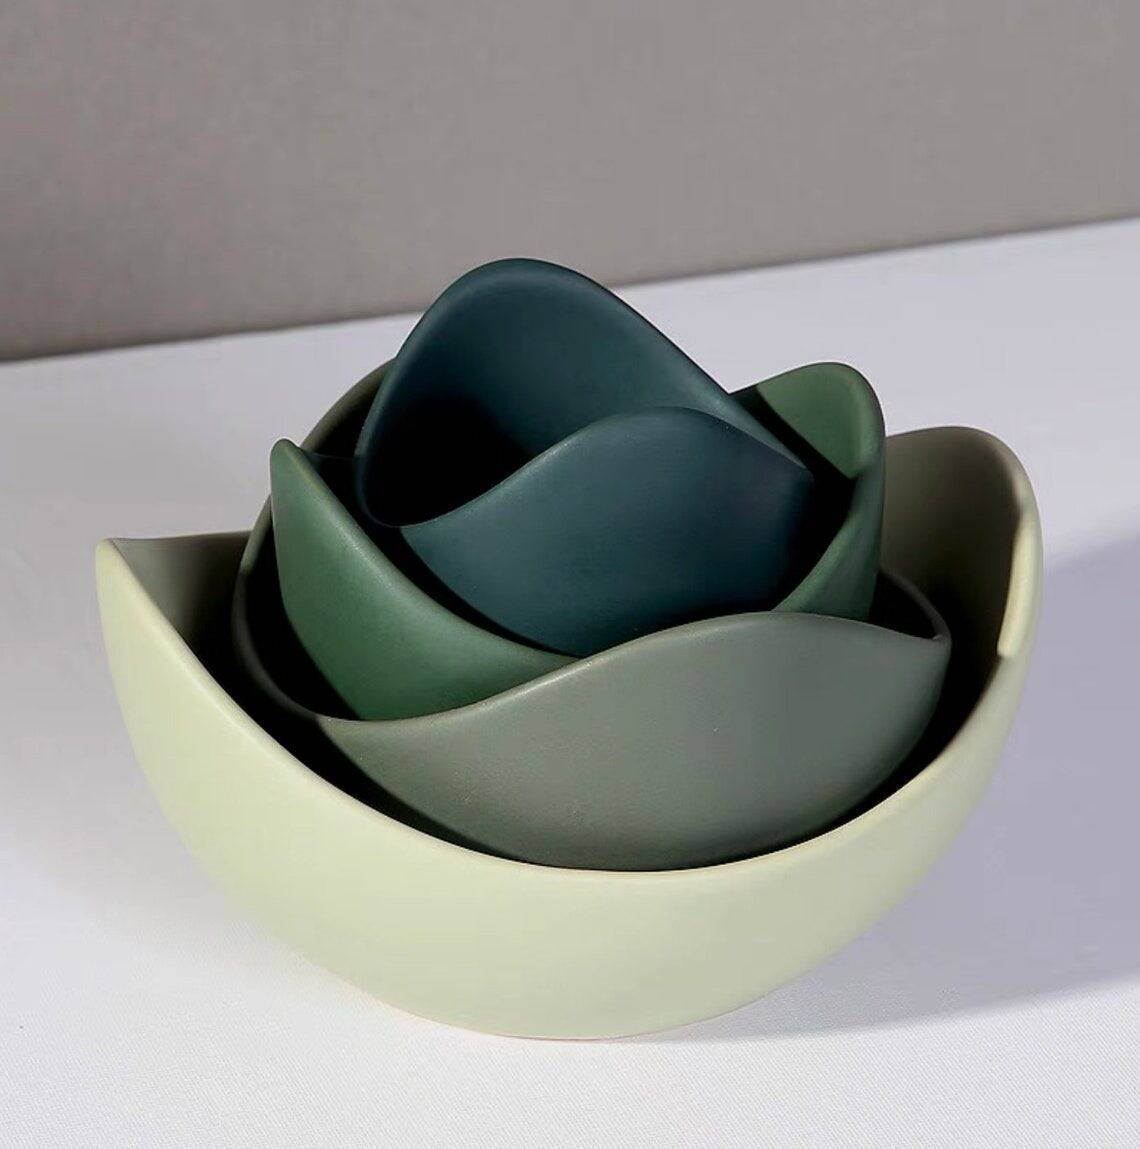 A stack of green ceramic bowls